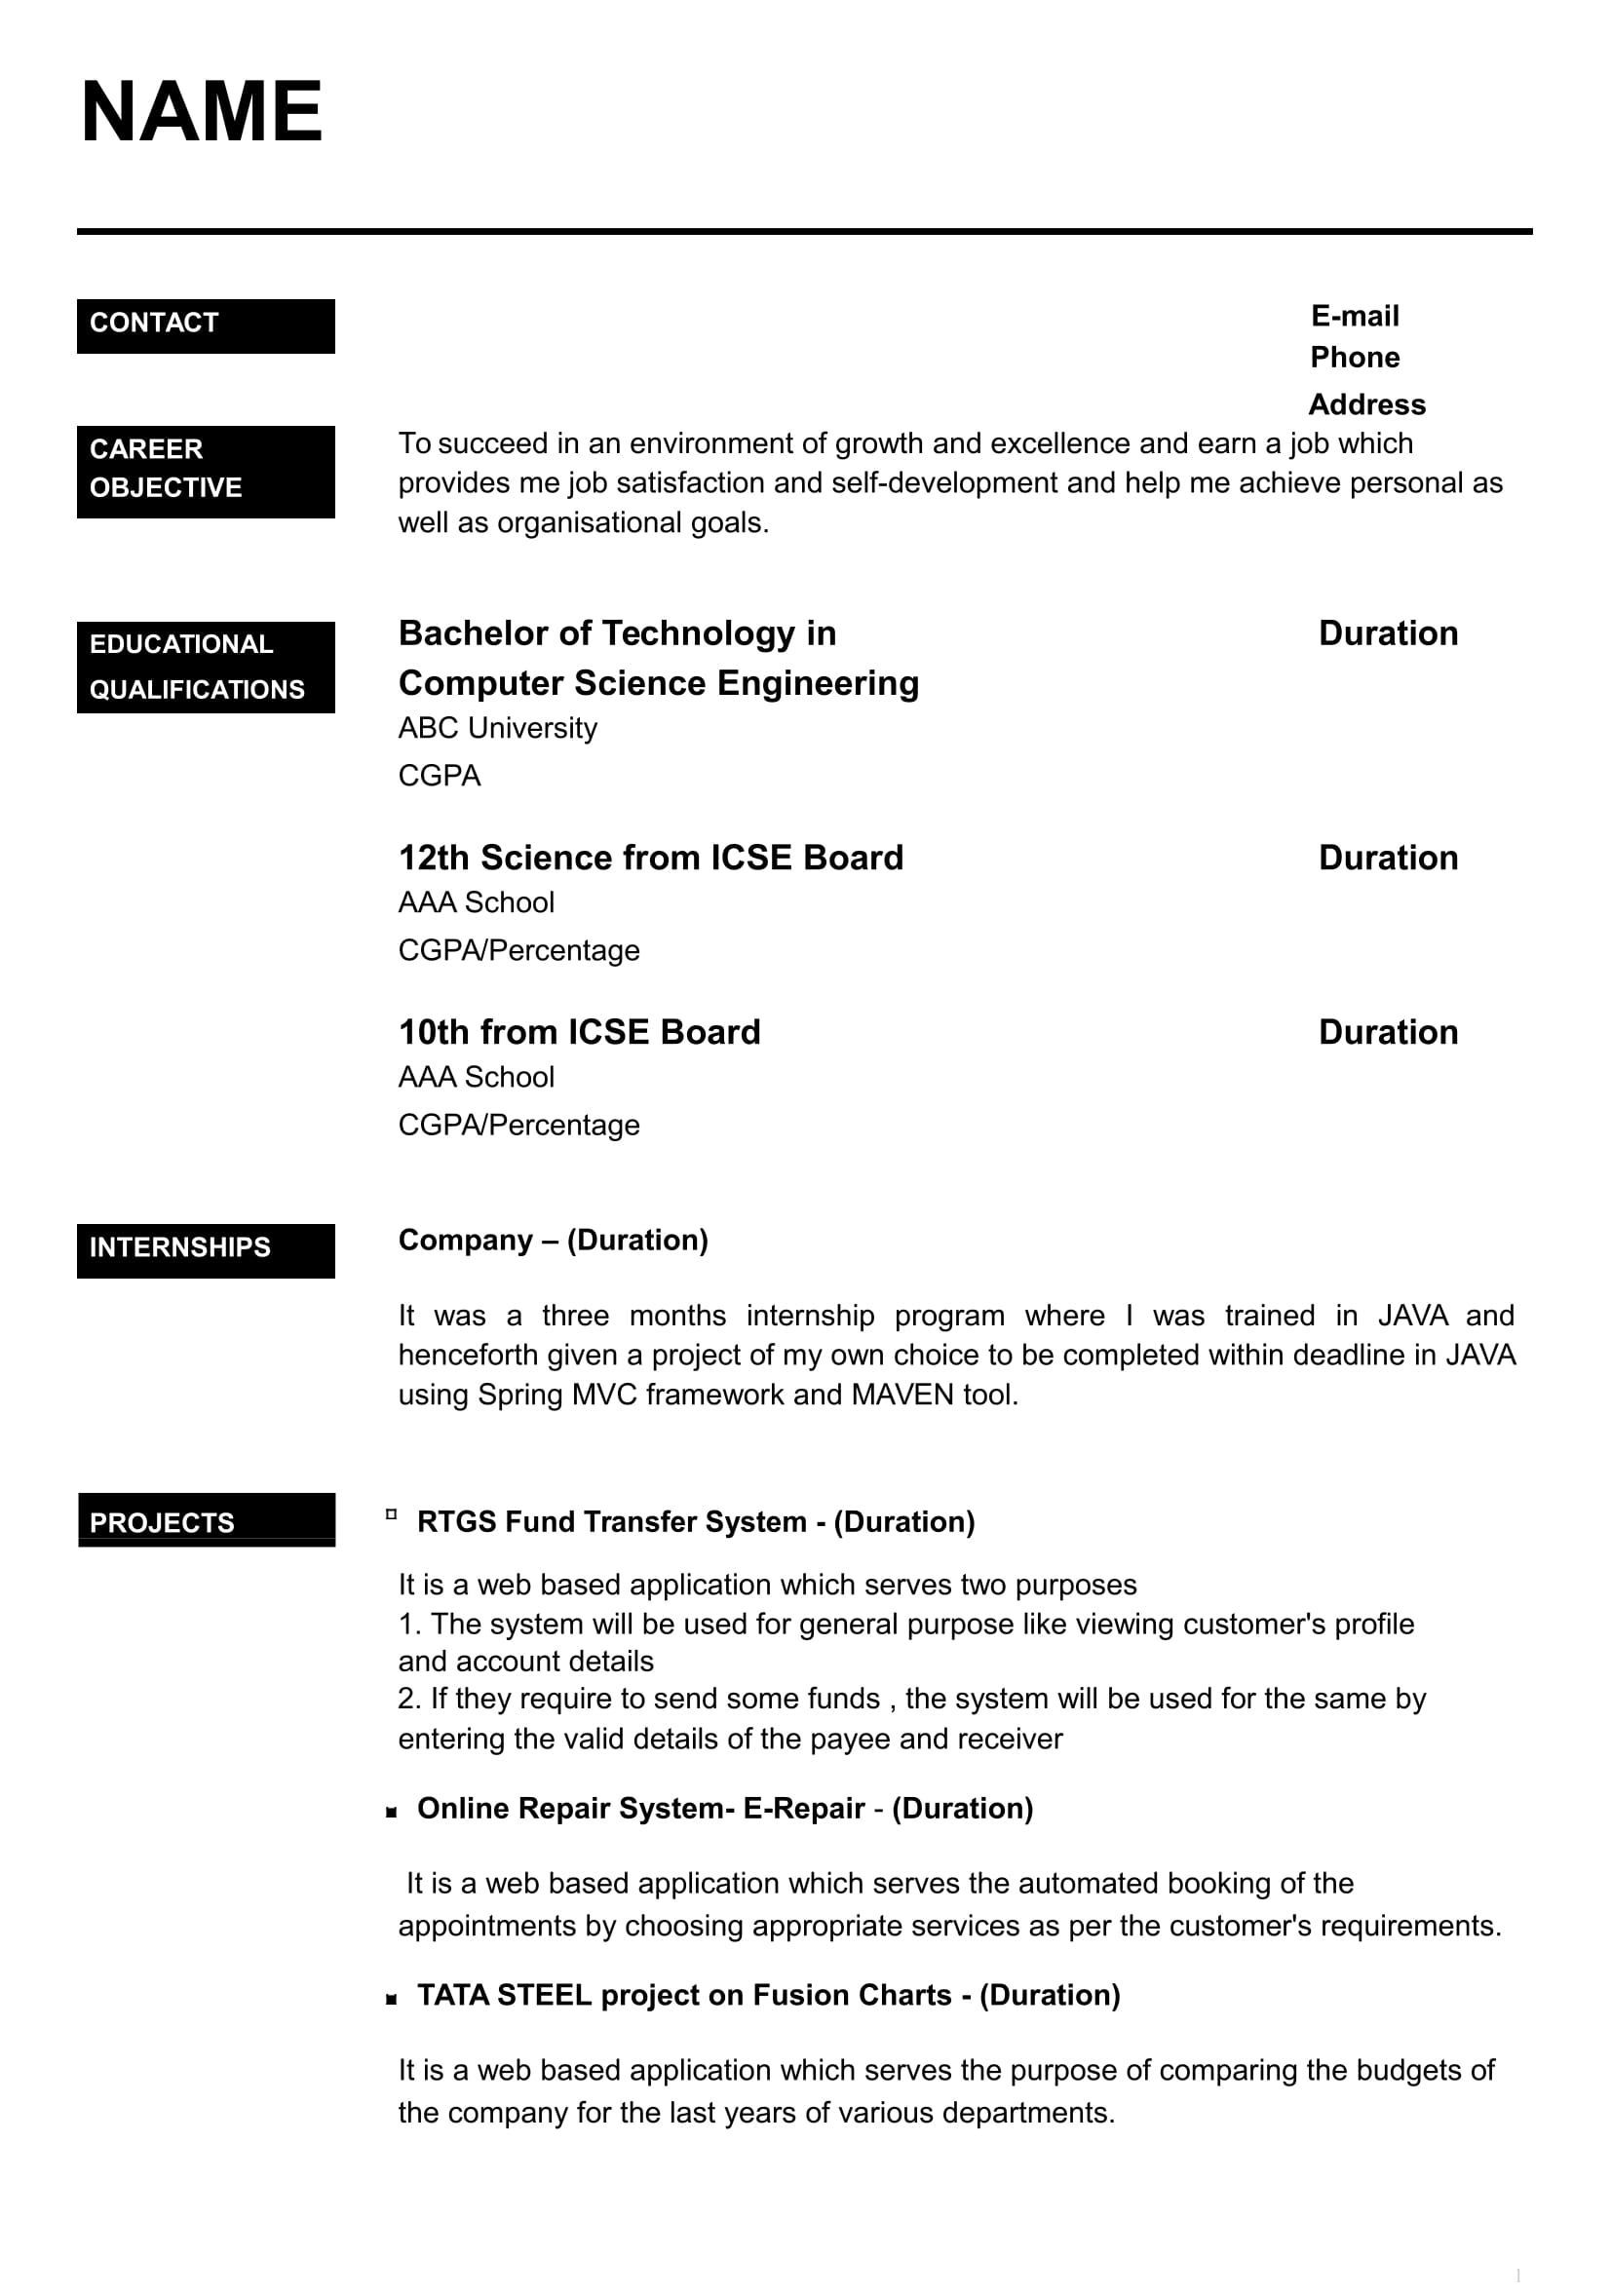 Resume Templates Word Download For Freshers in 2020